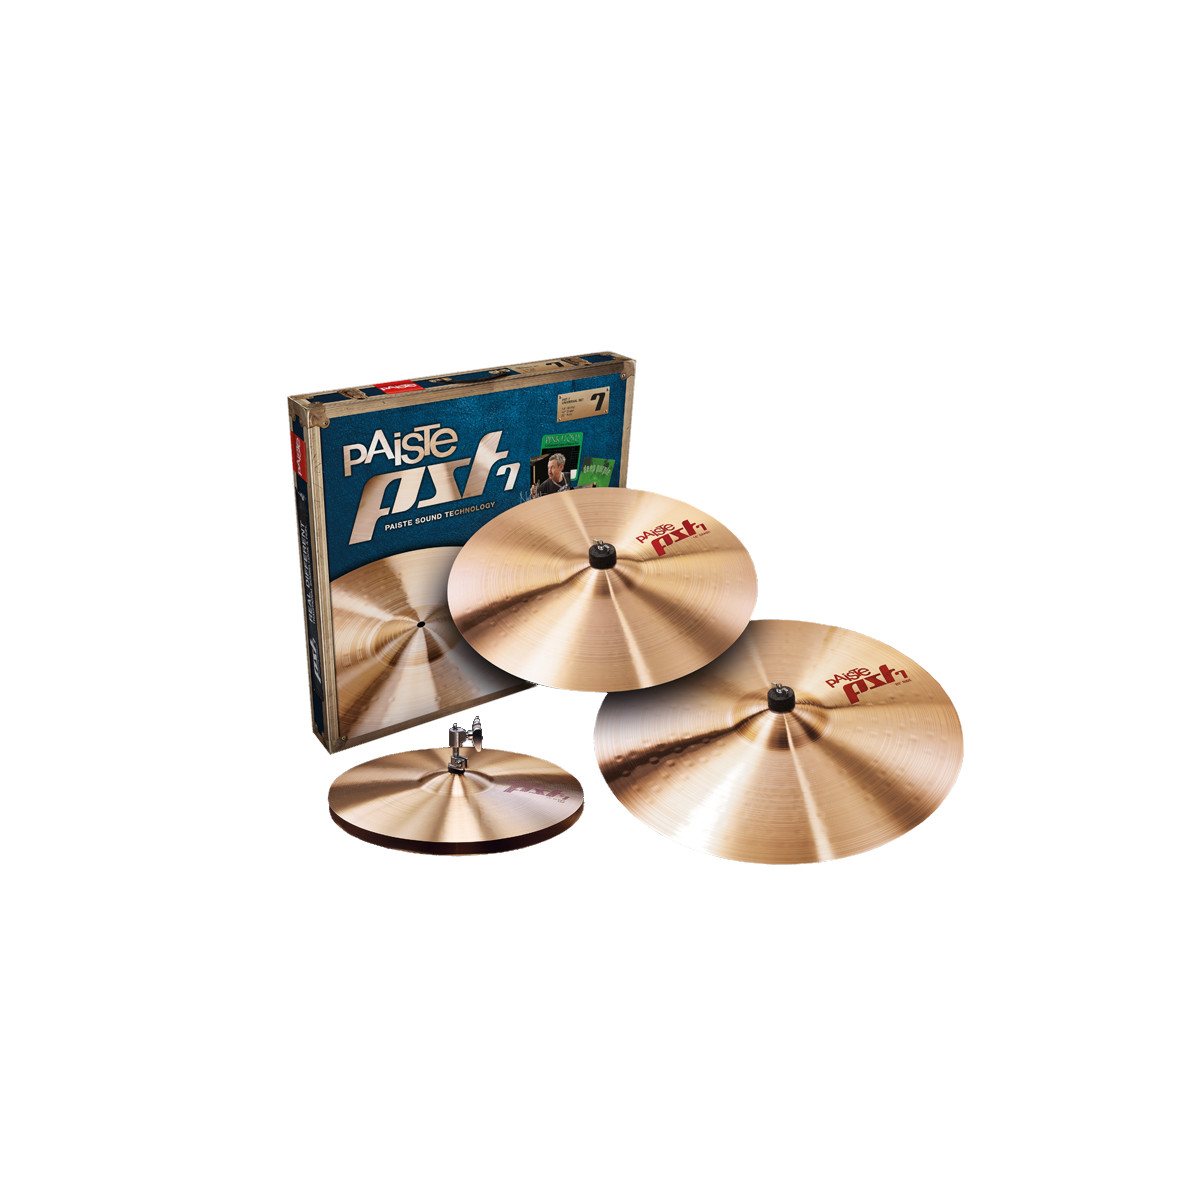 PAISTE PACK CYMBALES PST7 SESSION (LIGHT)